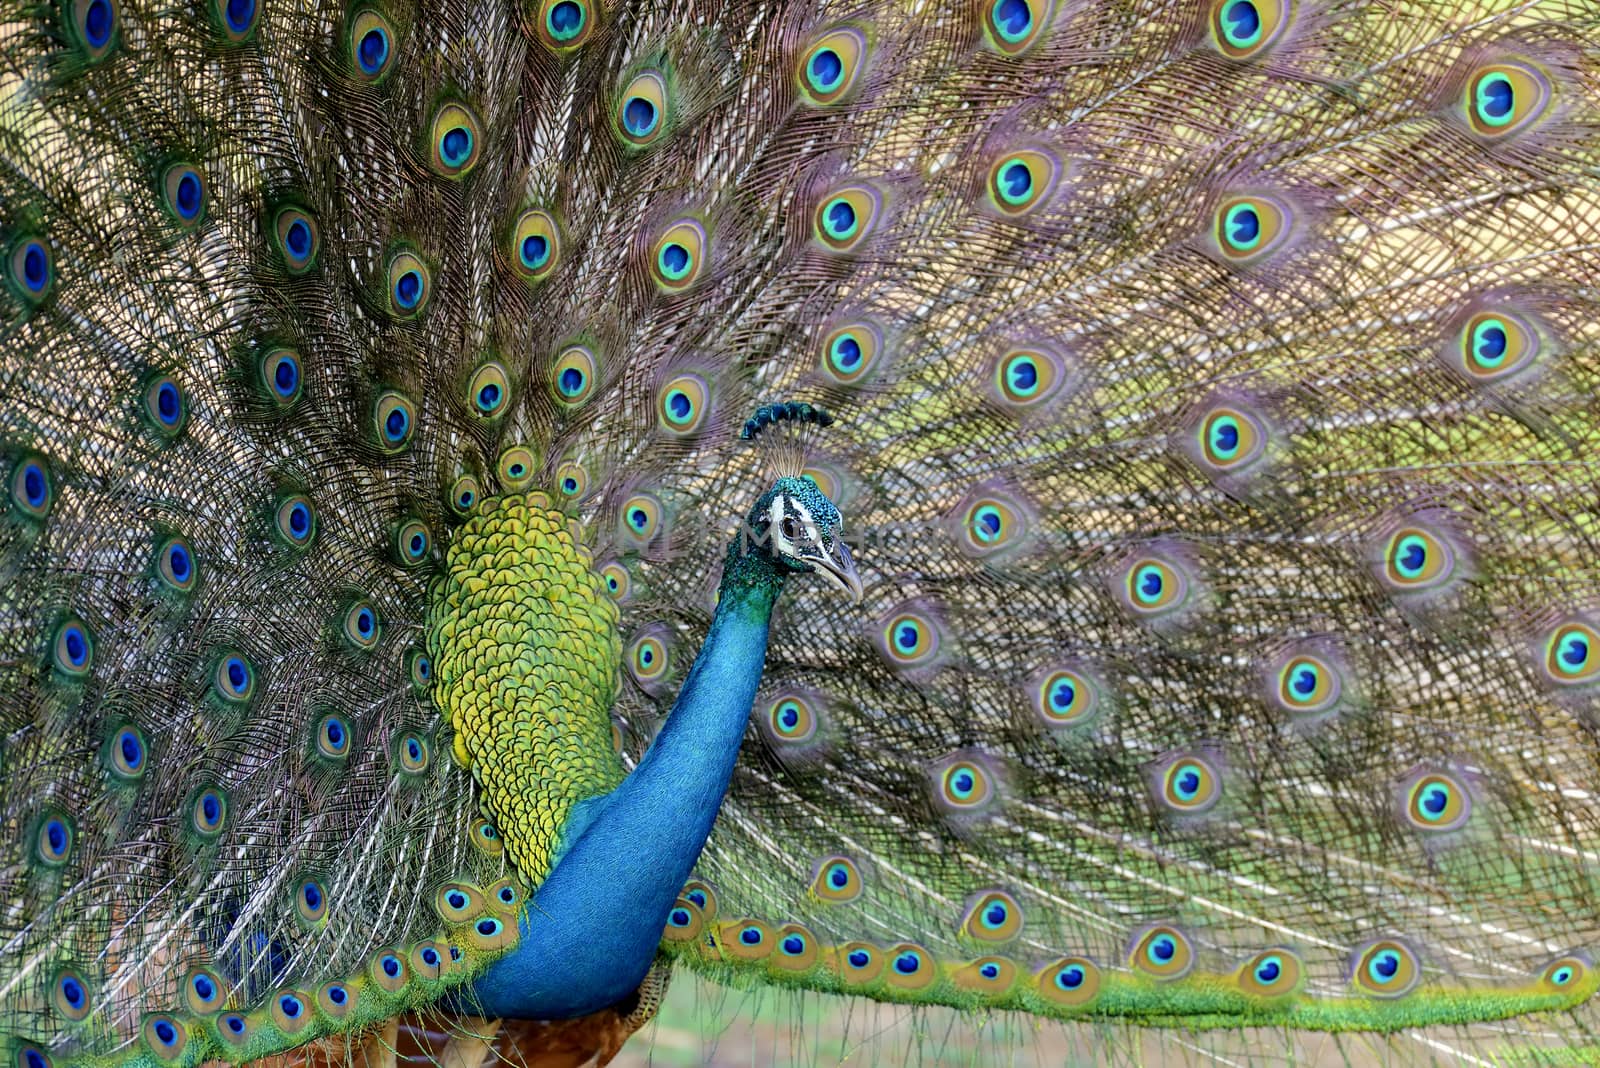 Portrait of beautiful peacock with feathers out